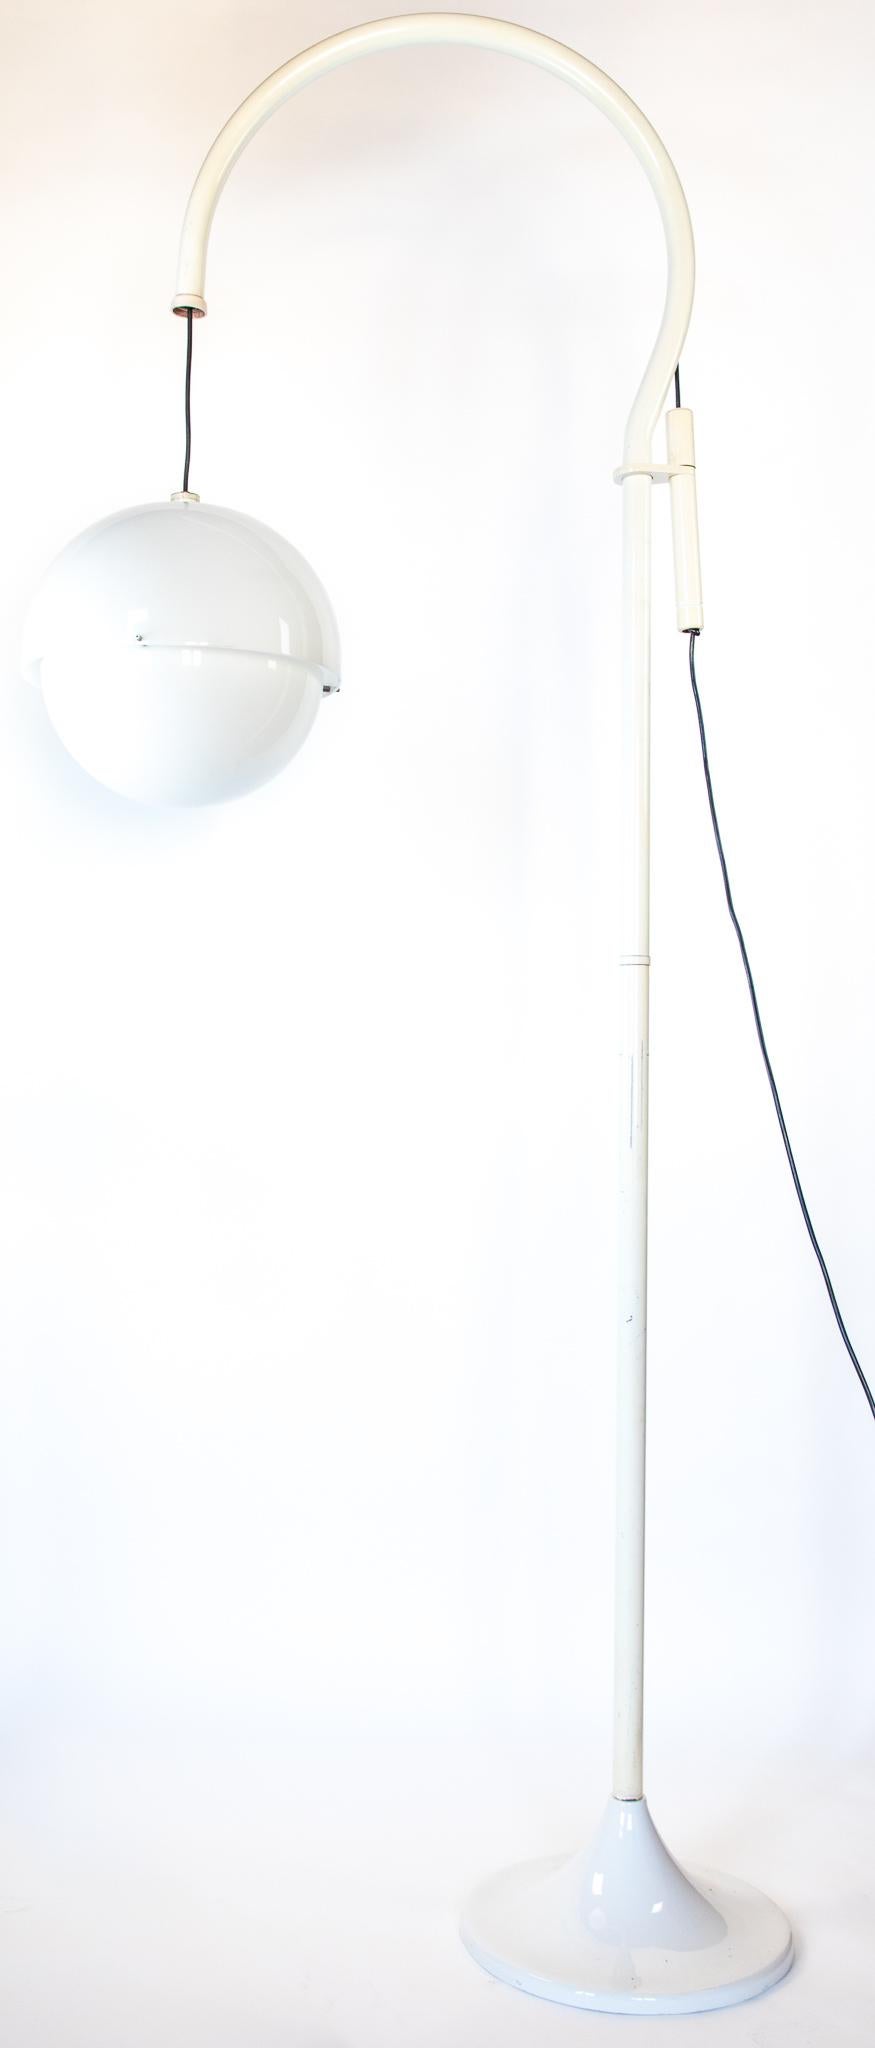  Mid-Century Modern XL Floor Lamp by Luigi Bandini Buti for Kartell, Italy 1970s.

Designed by Luigi Bandindi Buti for Kartell, this large Mid-Century Modern Italian floor lamp is a true iconic piece of the late 1960s made from lacquered metal and